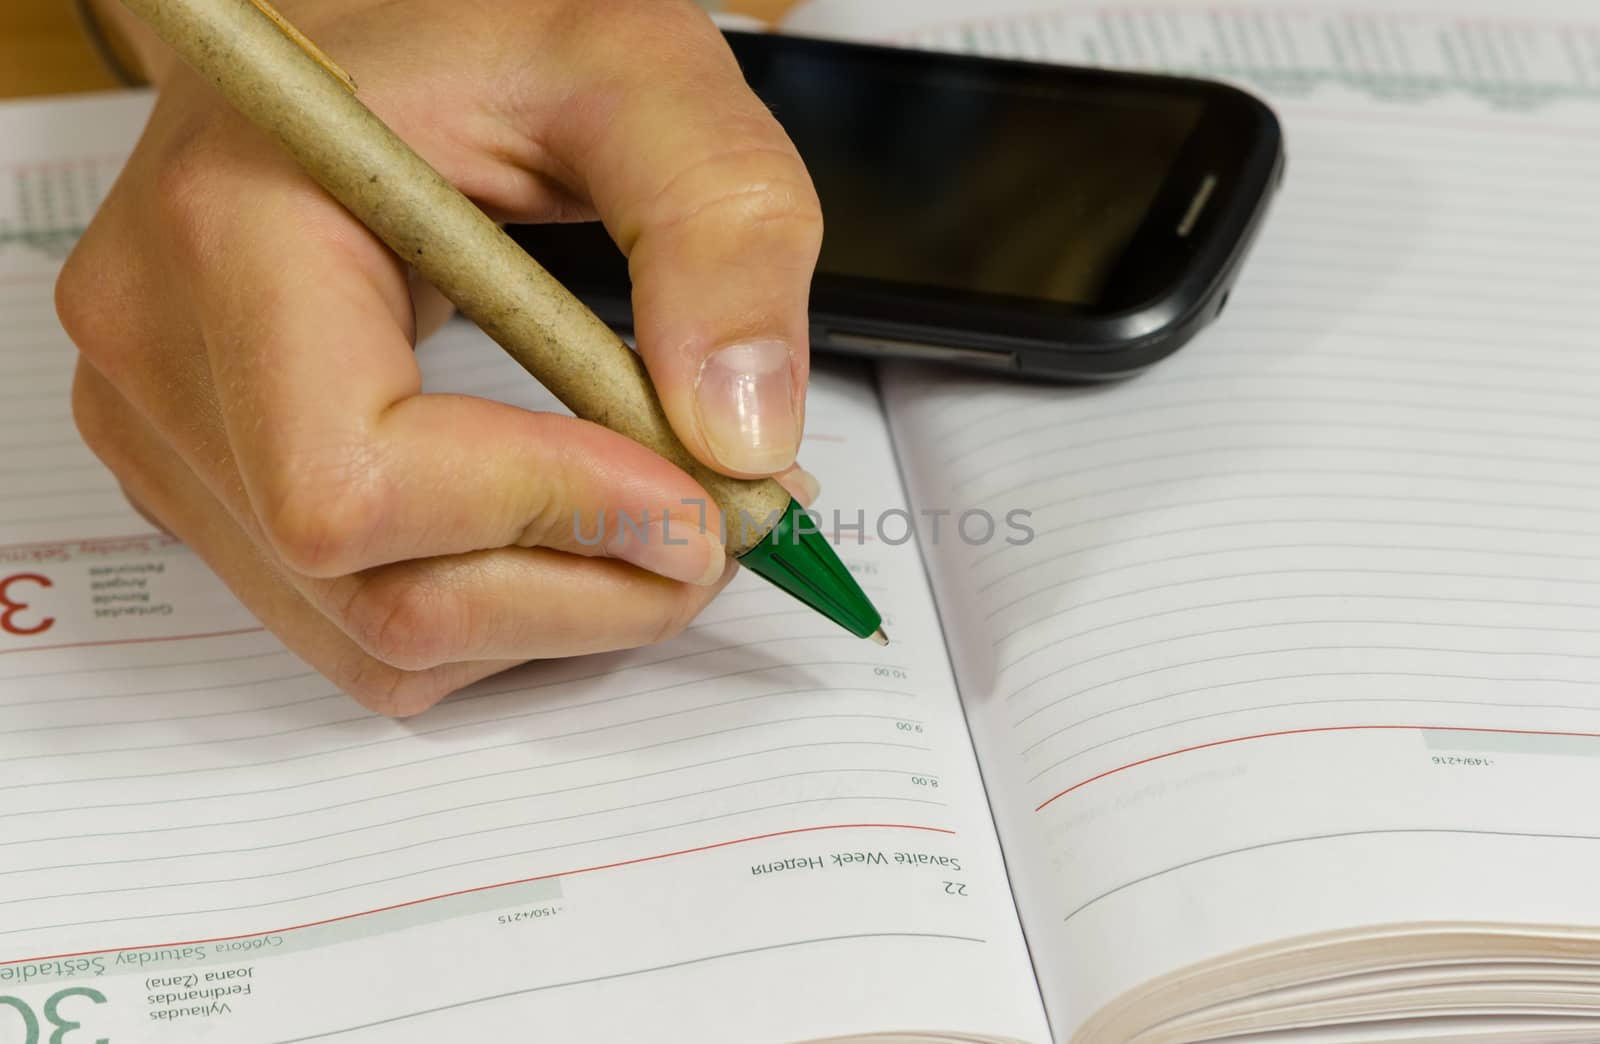 Business woman hand with pen make write notes in notebook and mobile smart phone.